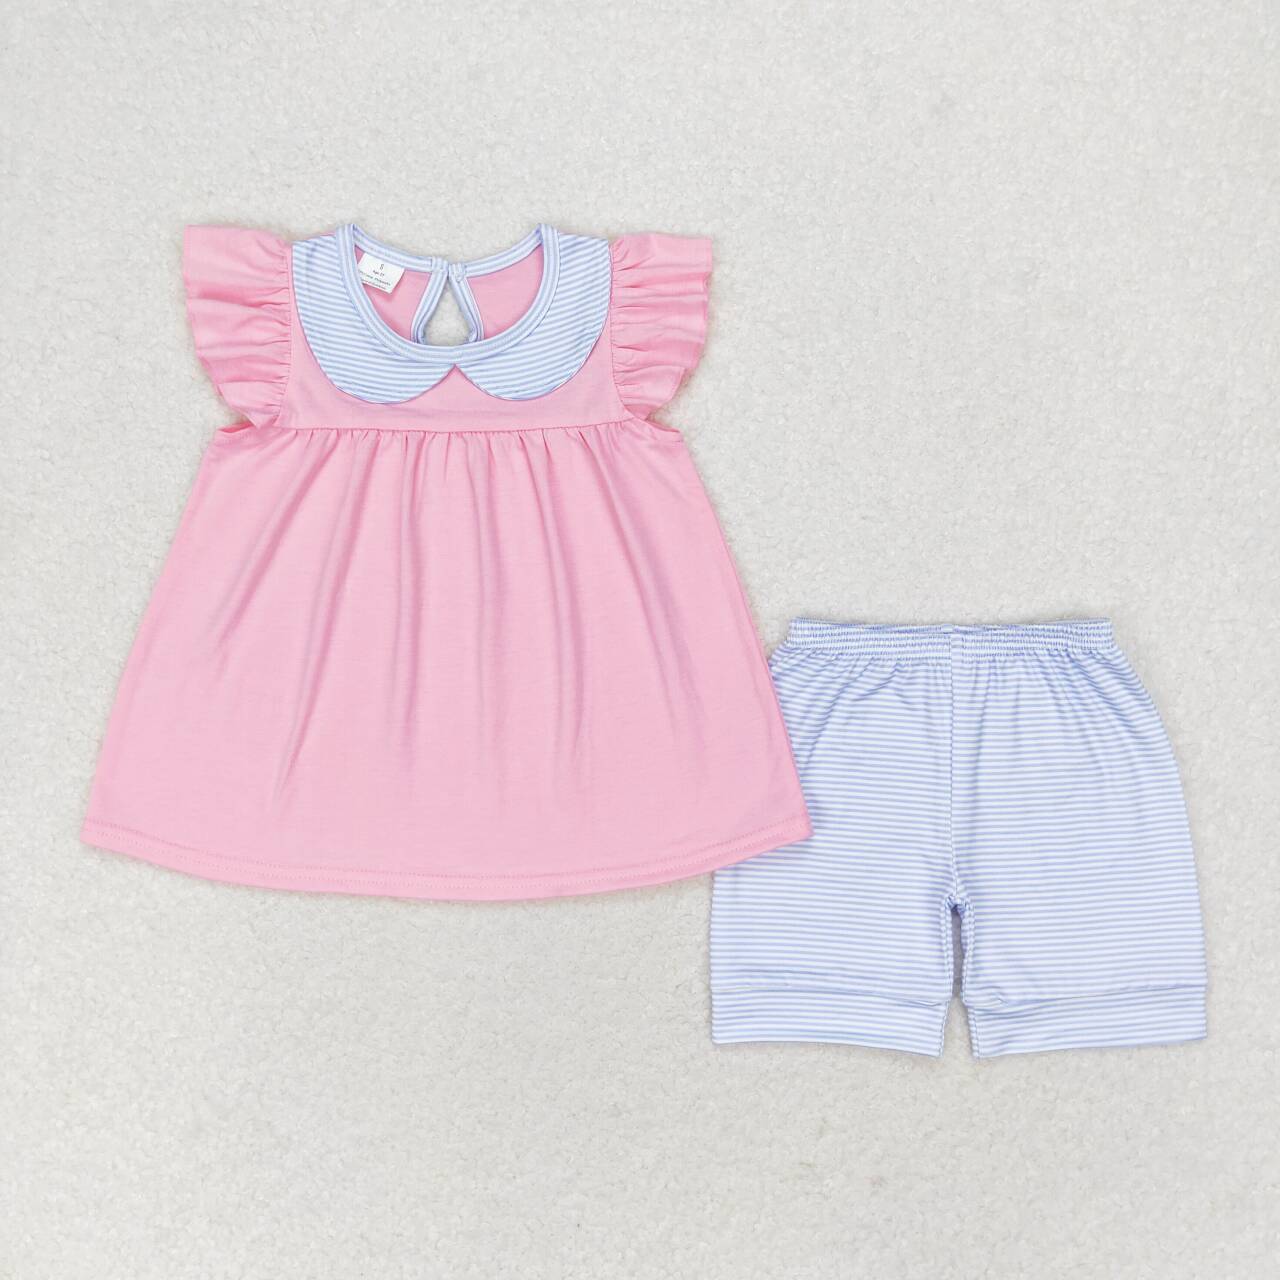 4 Solid Color Top Stripes Shorts Girls Summer Clothes Set Sisters Wear